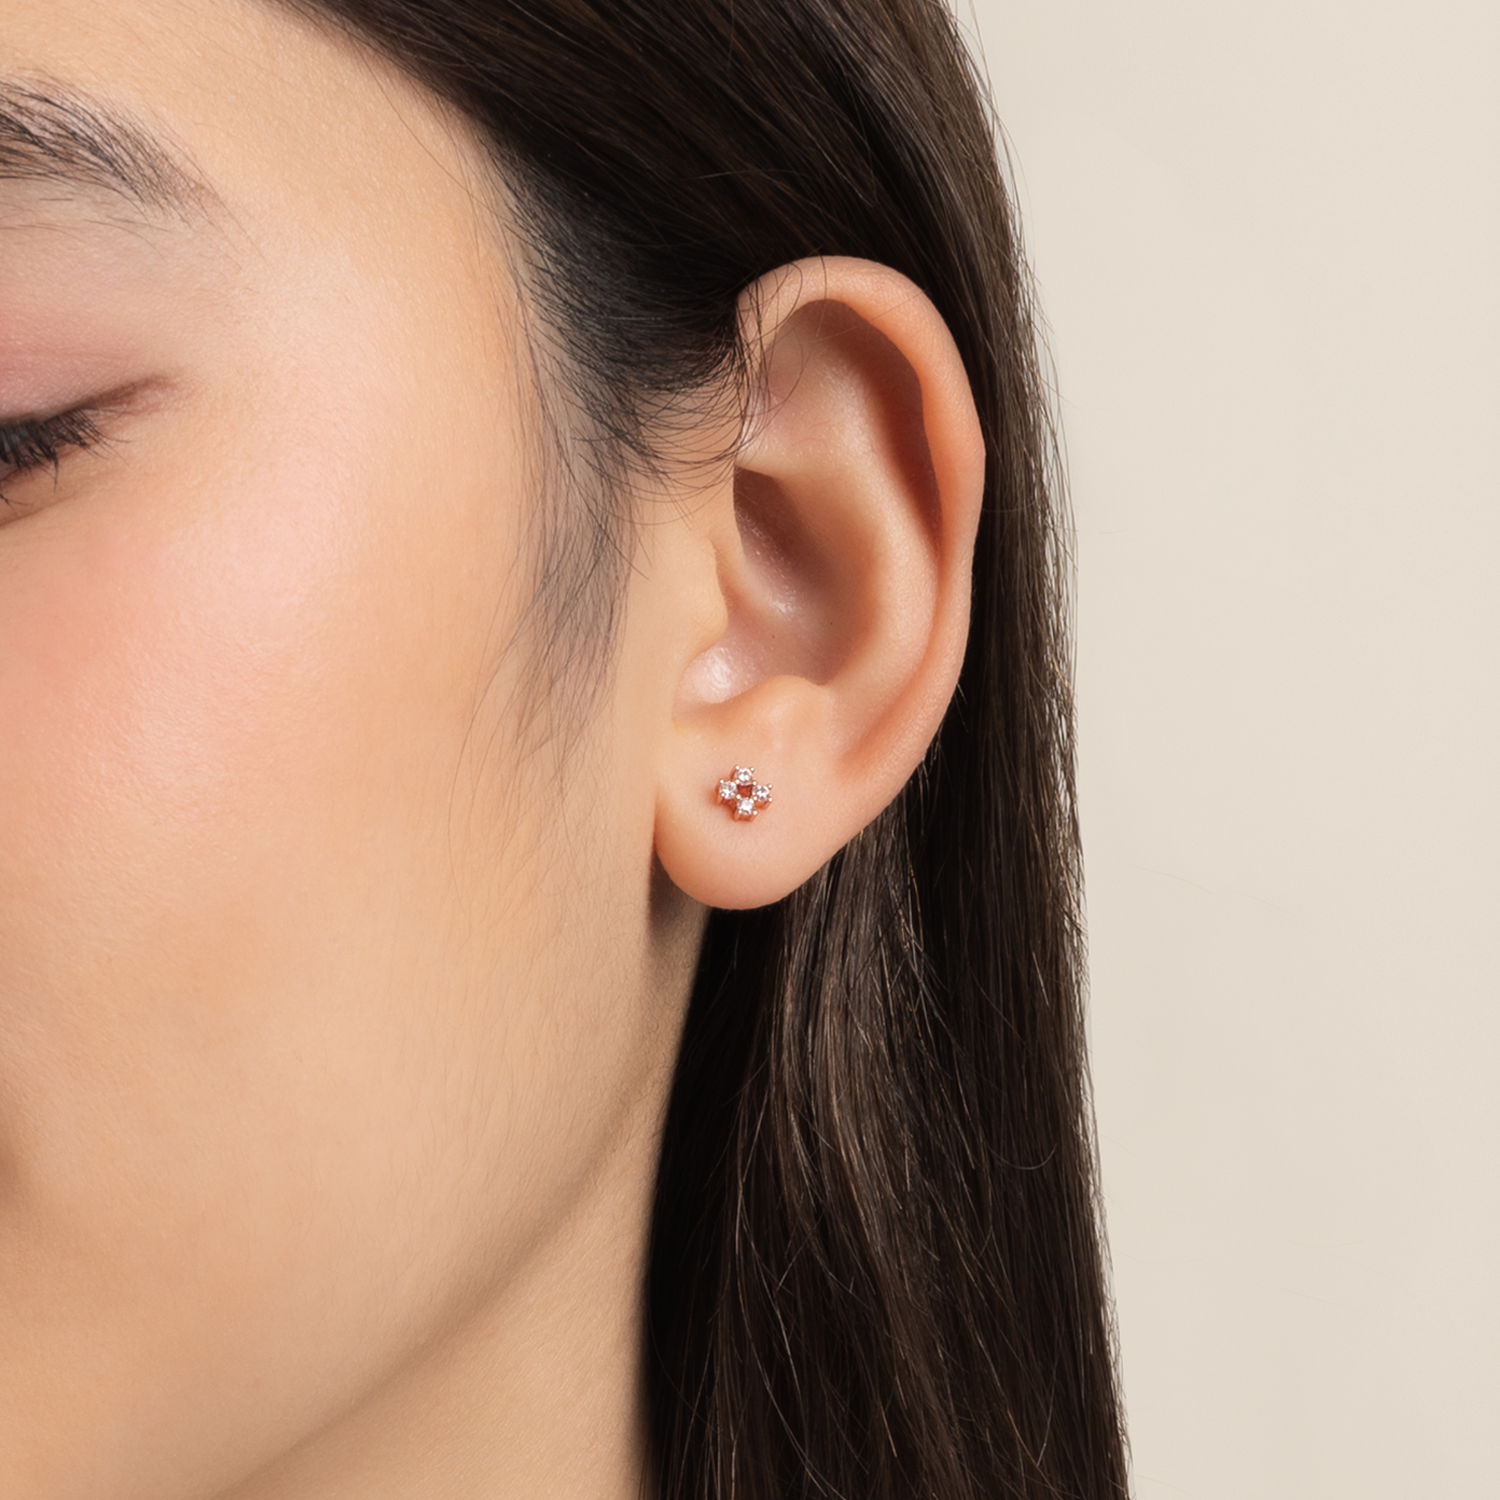 Model is wearing elegant and dainty earrings in rose gold with cubic zirconia